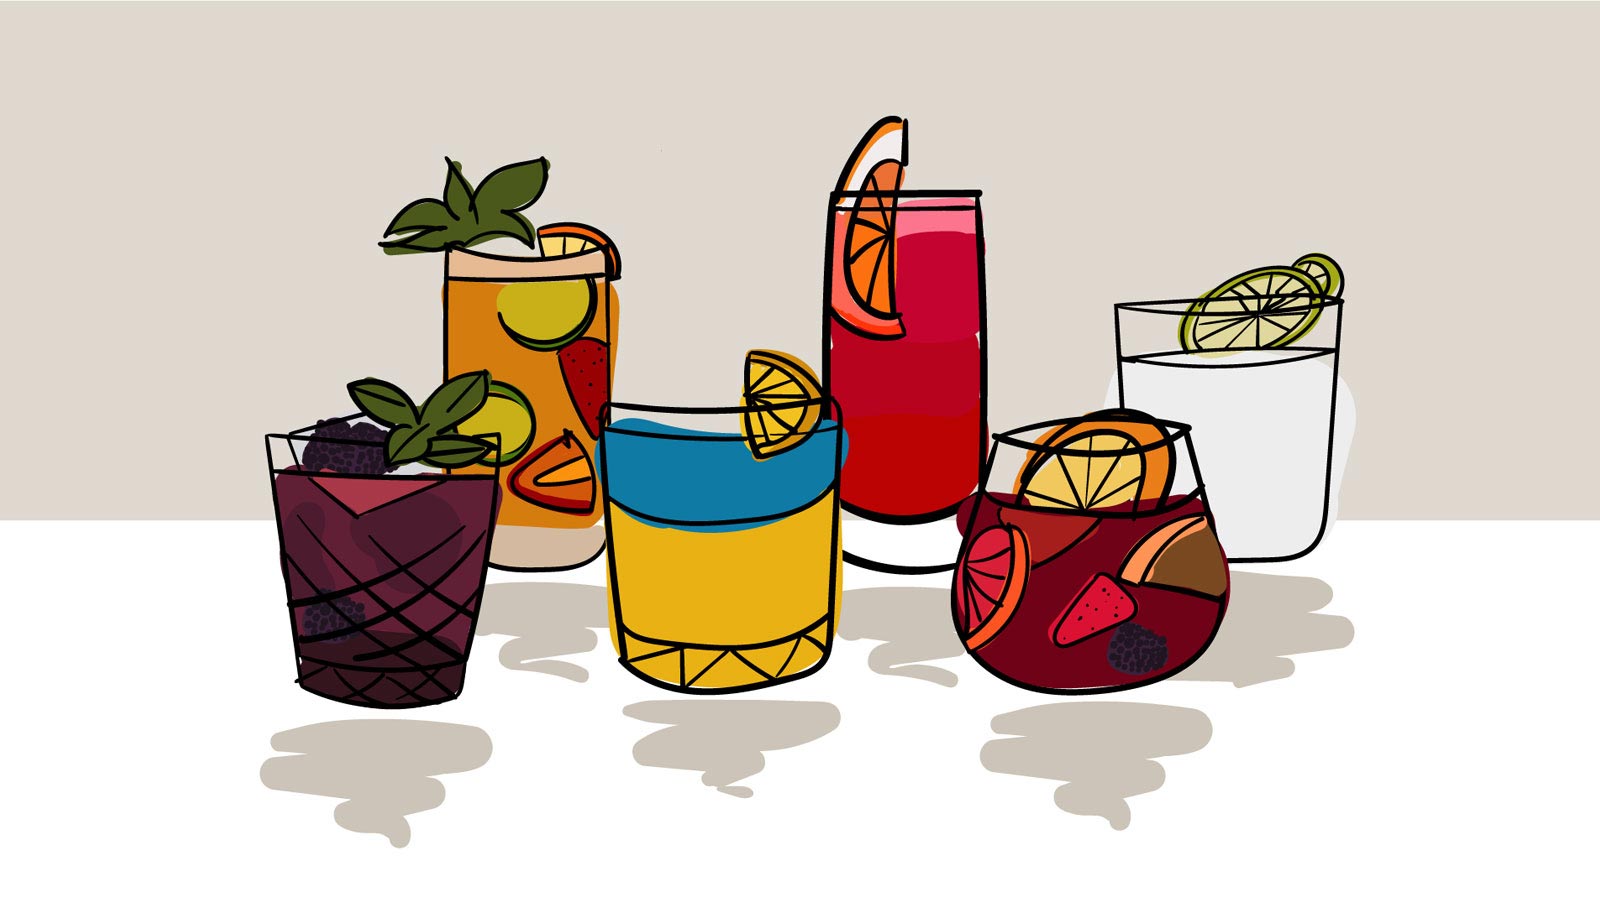 Glastonbury-themed cocktails in various glass shapes